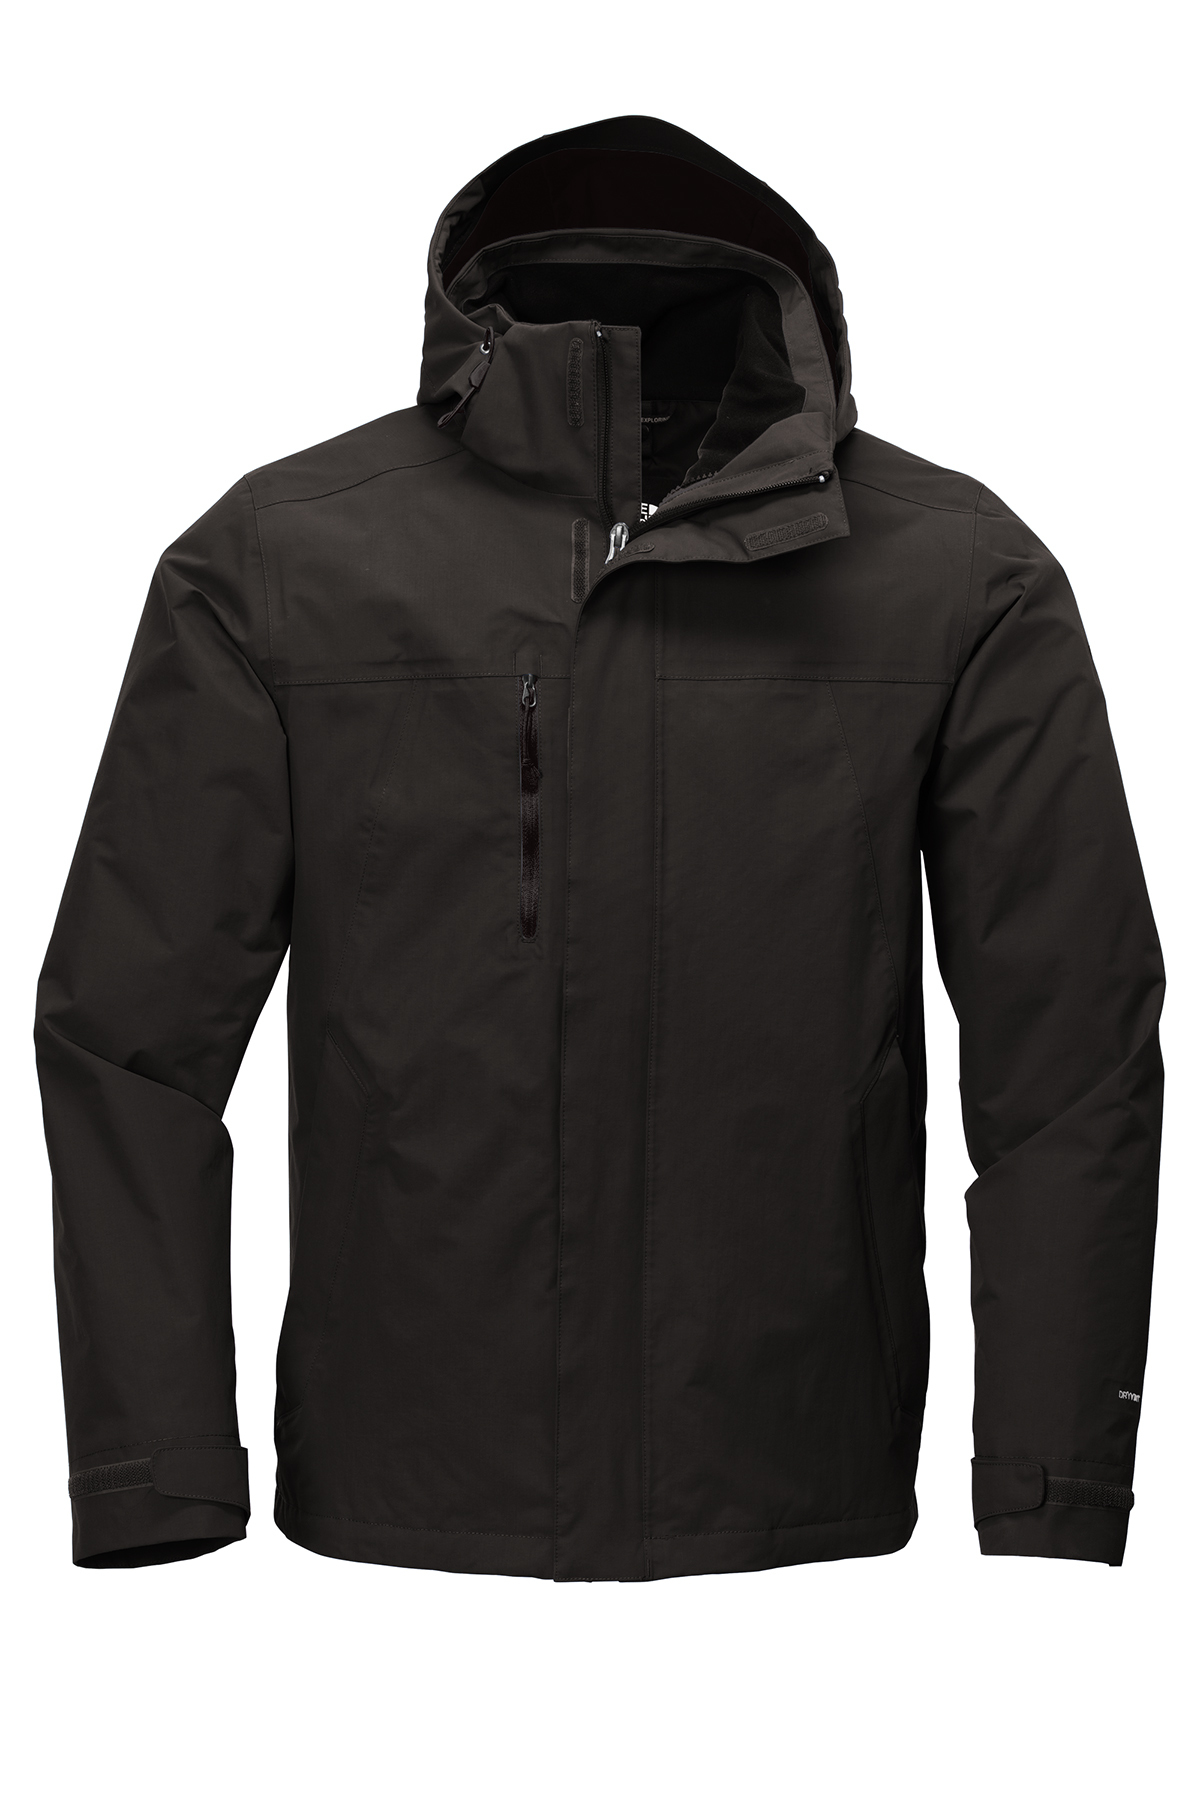 The North Face Traverse Triclimate 3-in-1 Jacket | Product | Company